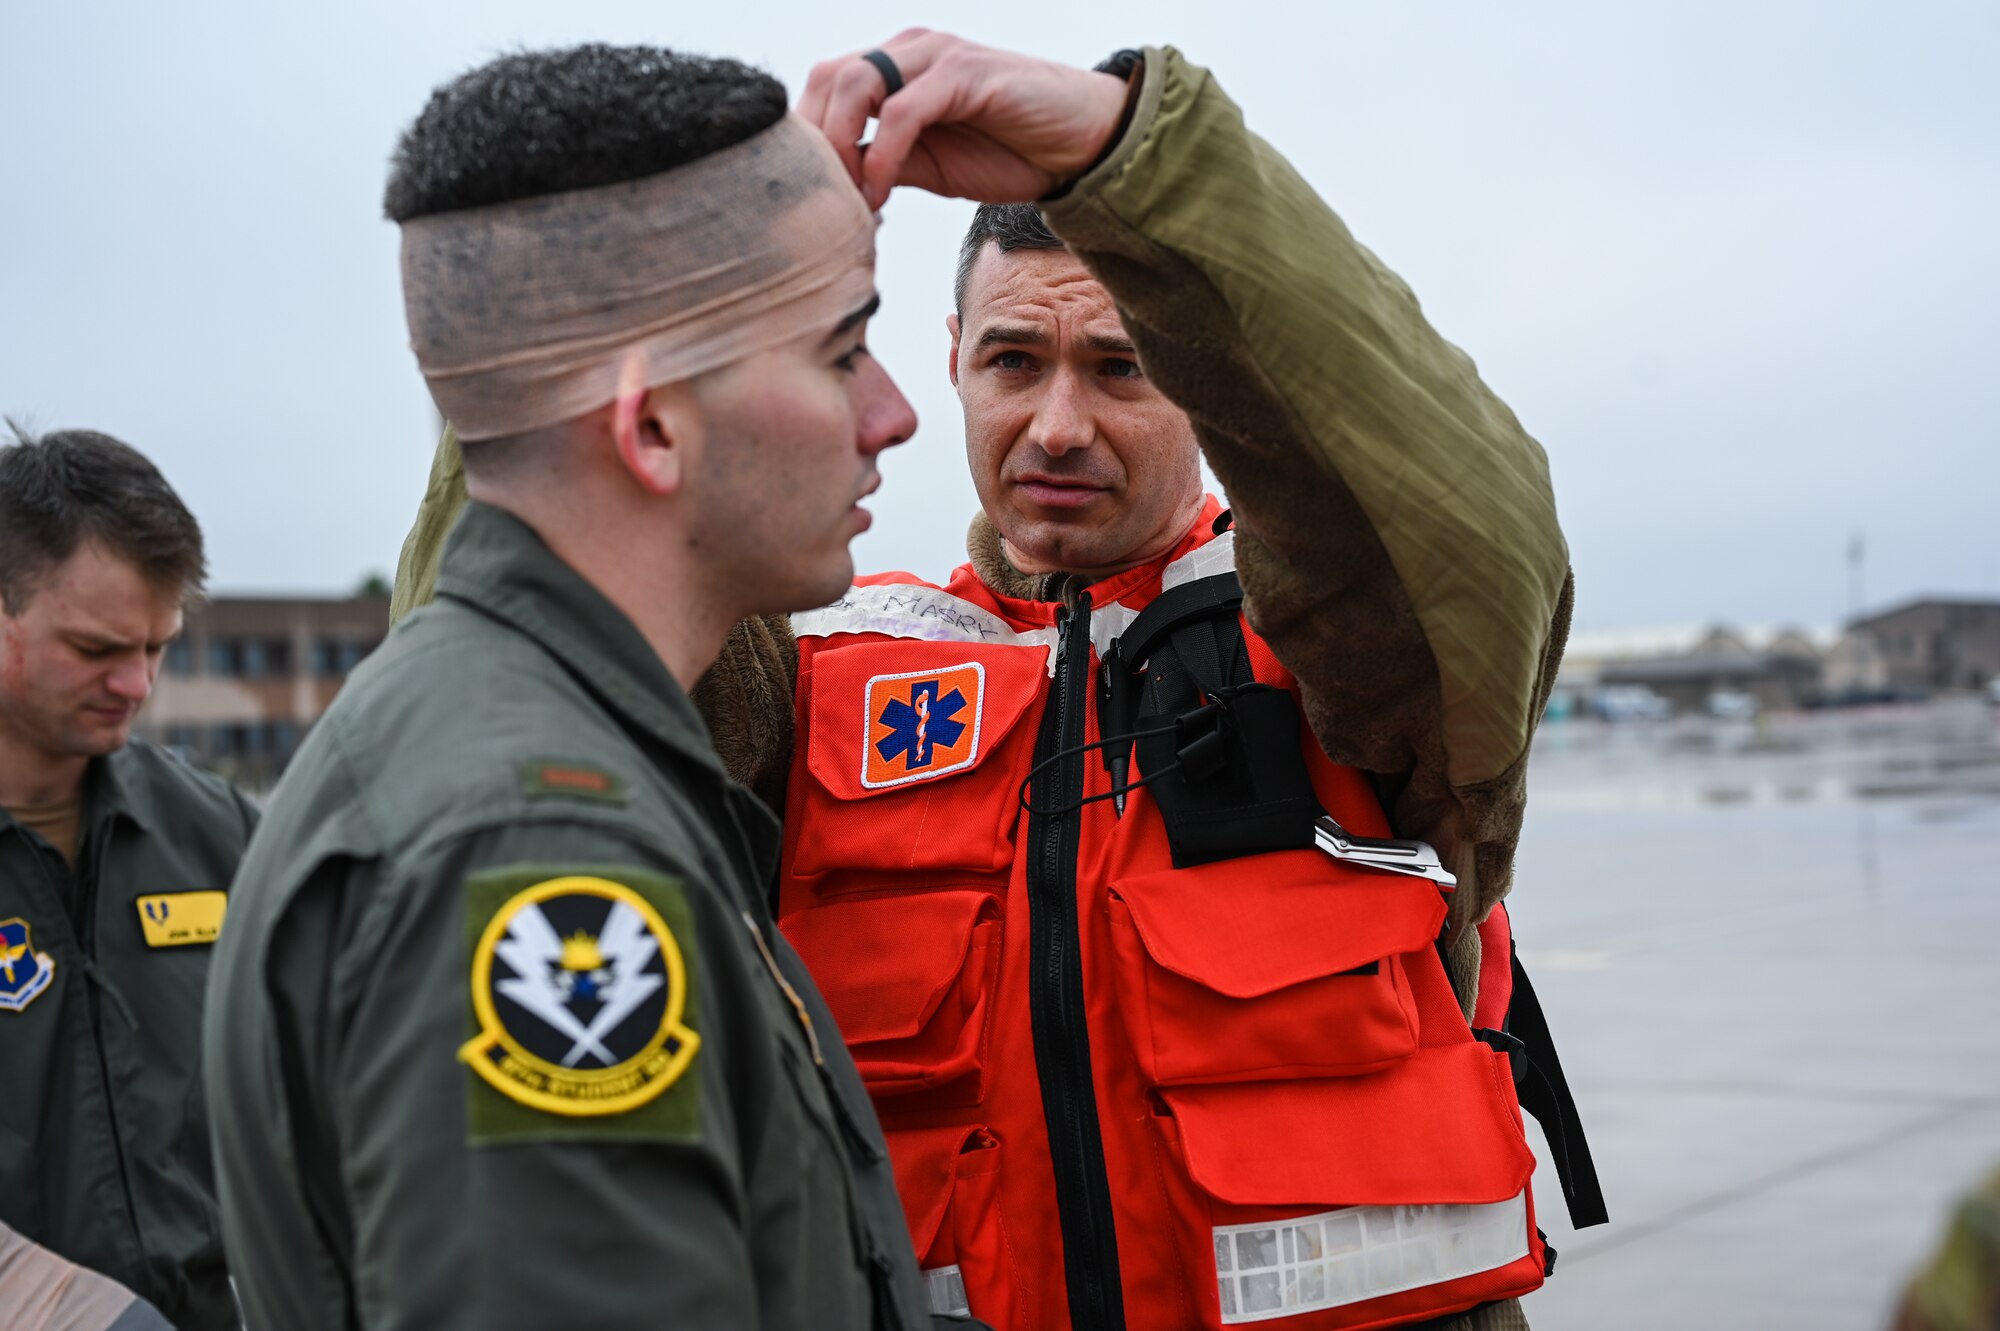 U.S. Air Force Capt. Colin Sulpizio (left), 47th Medical Group family physician, checks the simulated head wound of 2nd Lt. Antonio Izquierdo, 47th Student Squadron student pilot, during a Major Accident Response Exercise (MARE) on the flight line at Laughlin Air Force Base, Texas, Dec. 14, 2023